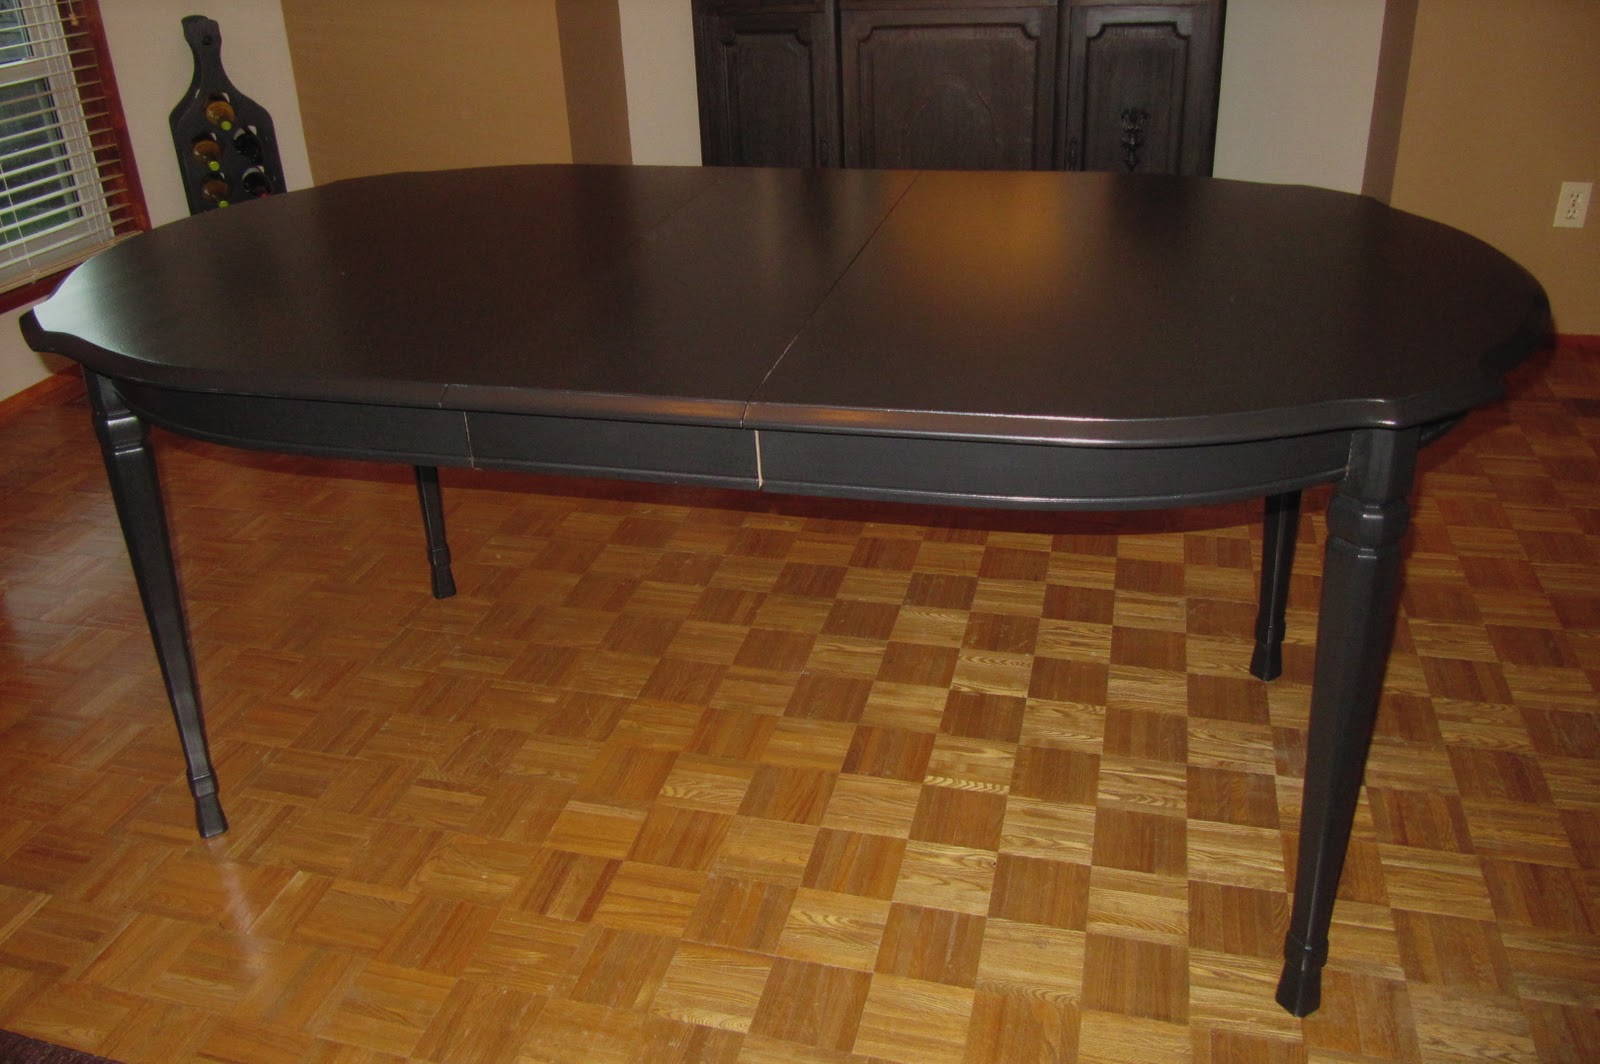 Jentiques: Classy Black Dining Room Table